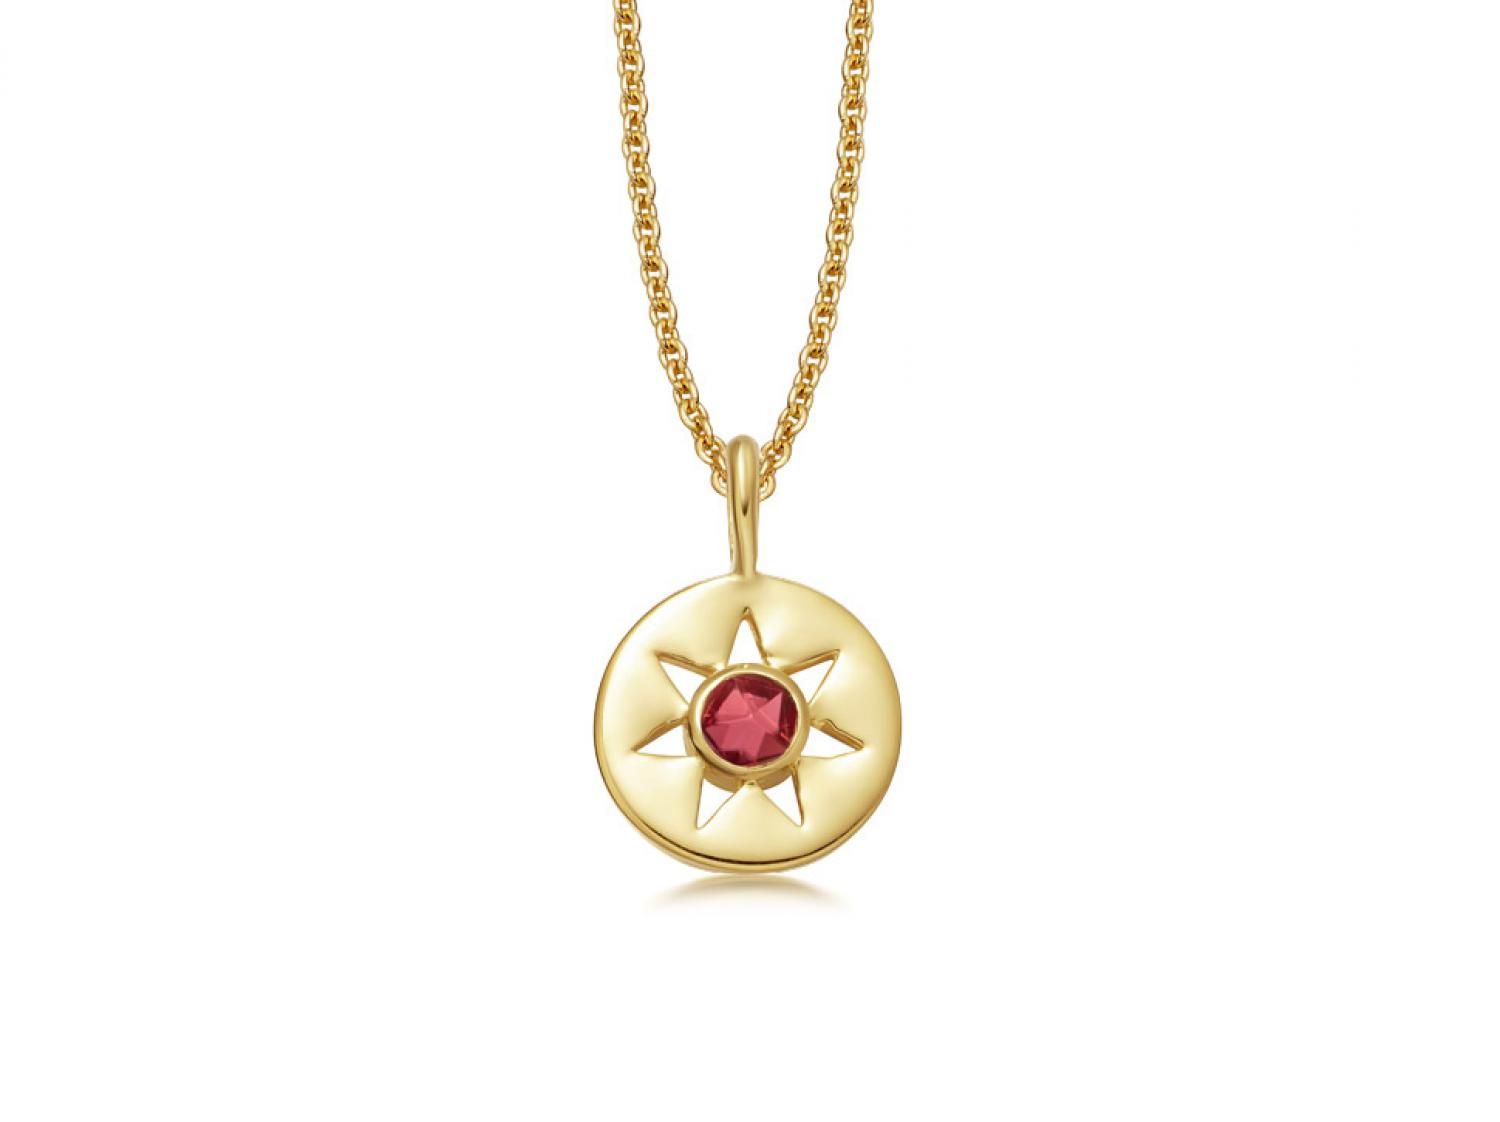 Missoma Garnet January Birthstone Necklace – Lyst With Best And Newest Garnet January Droplet Pendant Necklaces (View 12 of 25)